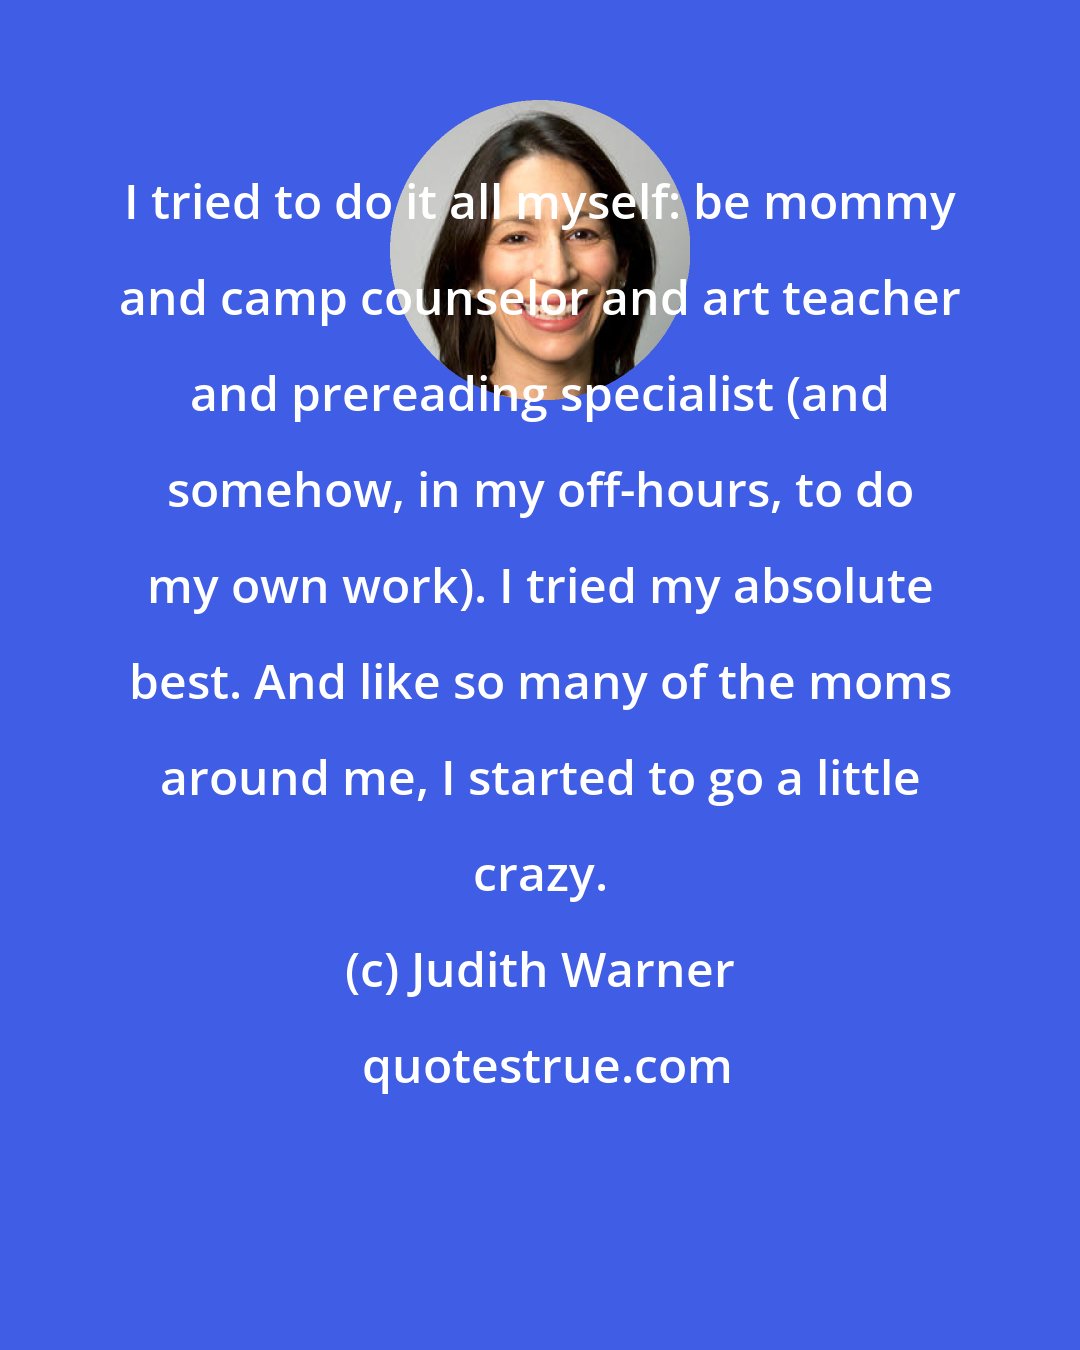 Judith Warner: I tried to do it all myself: be mommy and camp counselor and art teacher and prereading specialist (and somehow, in my off-hours, to do my own work). I tried my absolute best. And like so many of the moms around me, I started to go a little crazy.